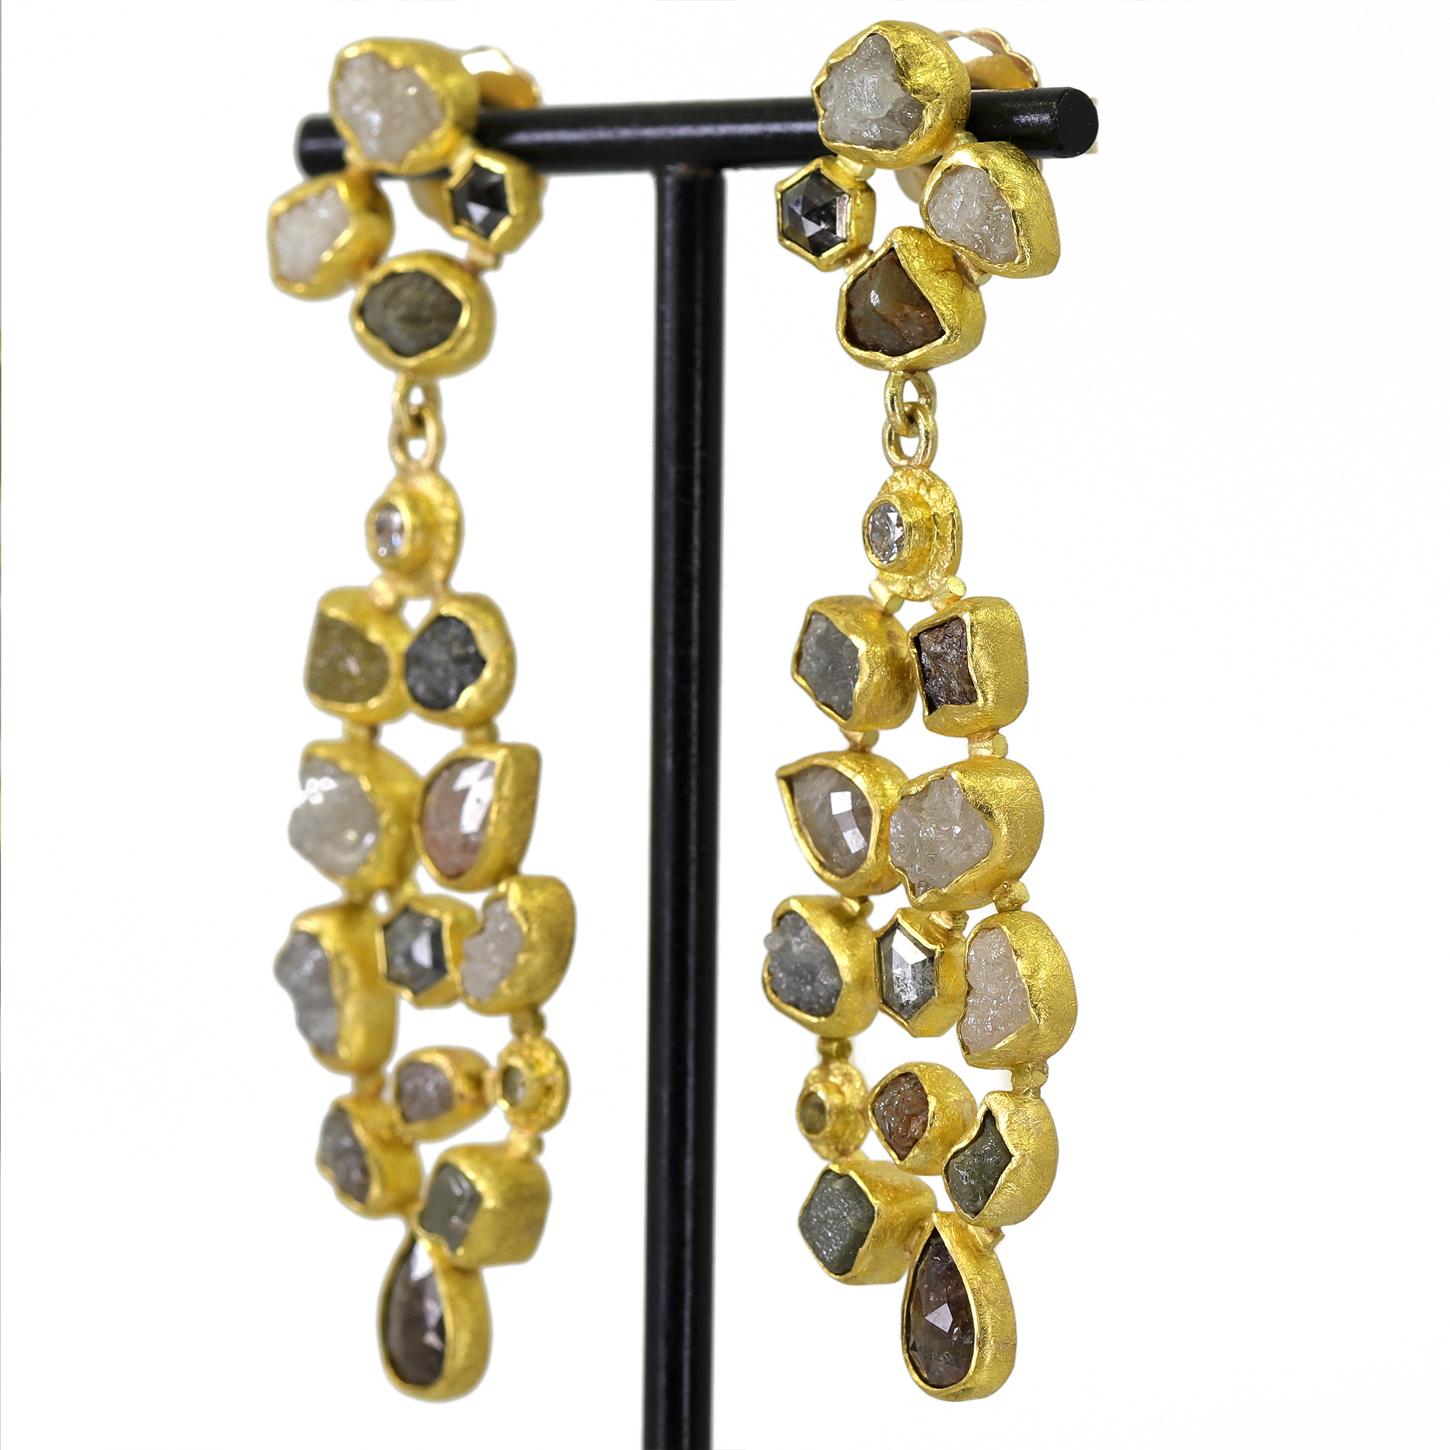 One of a Kind Big Mosiac Diamond Drop Earrings handmade by award-winning jewelry artist Petra Class showcasing a magnificent 18.10 total carats of completely natural assorted rose-cut, brilliant-cut, and rough diamonds individually set in the